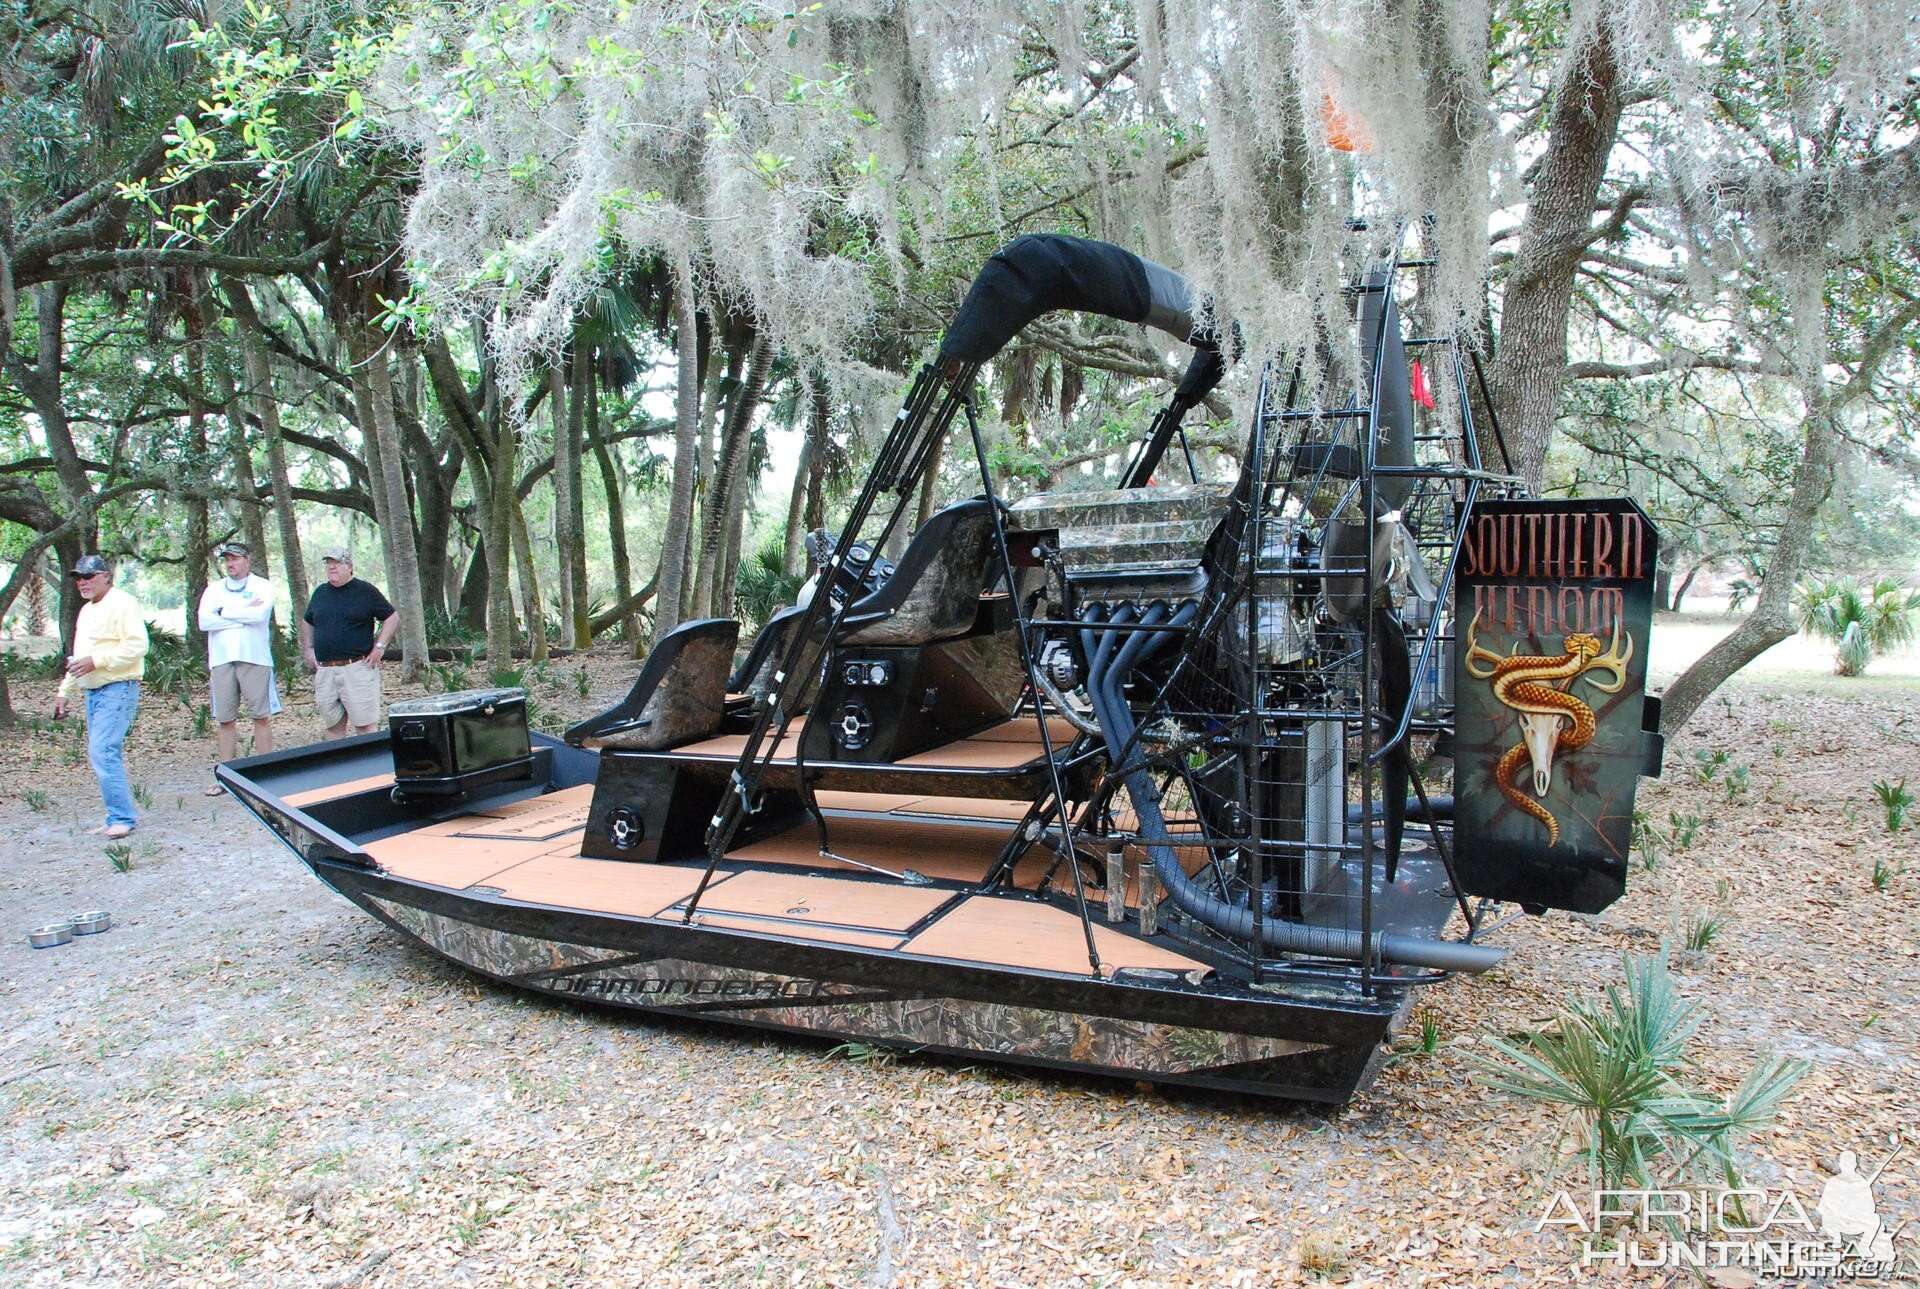 Florida is king of the baddest airboats in the world